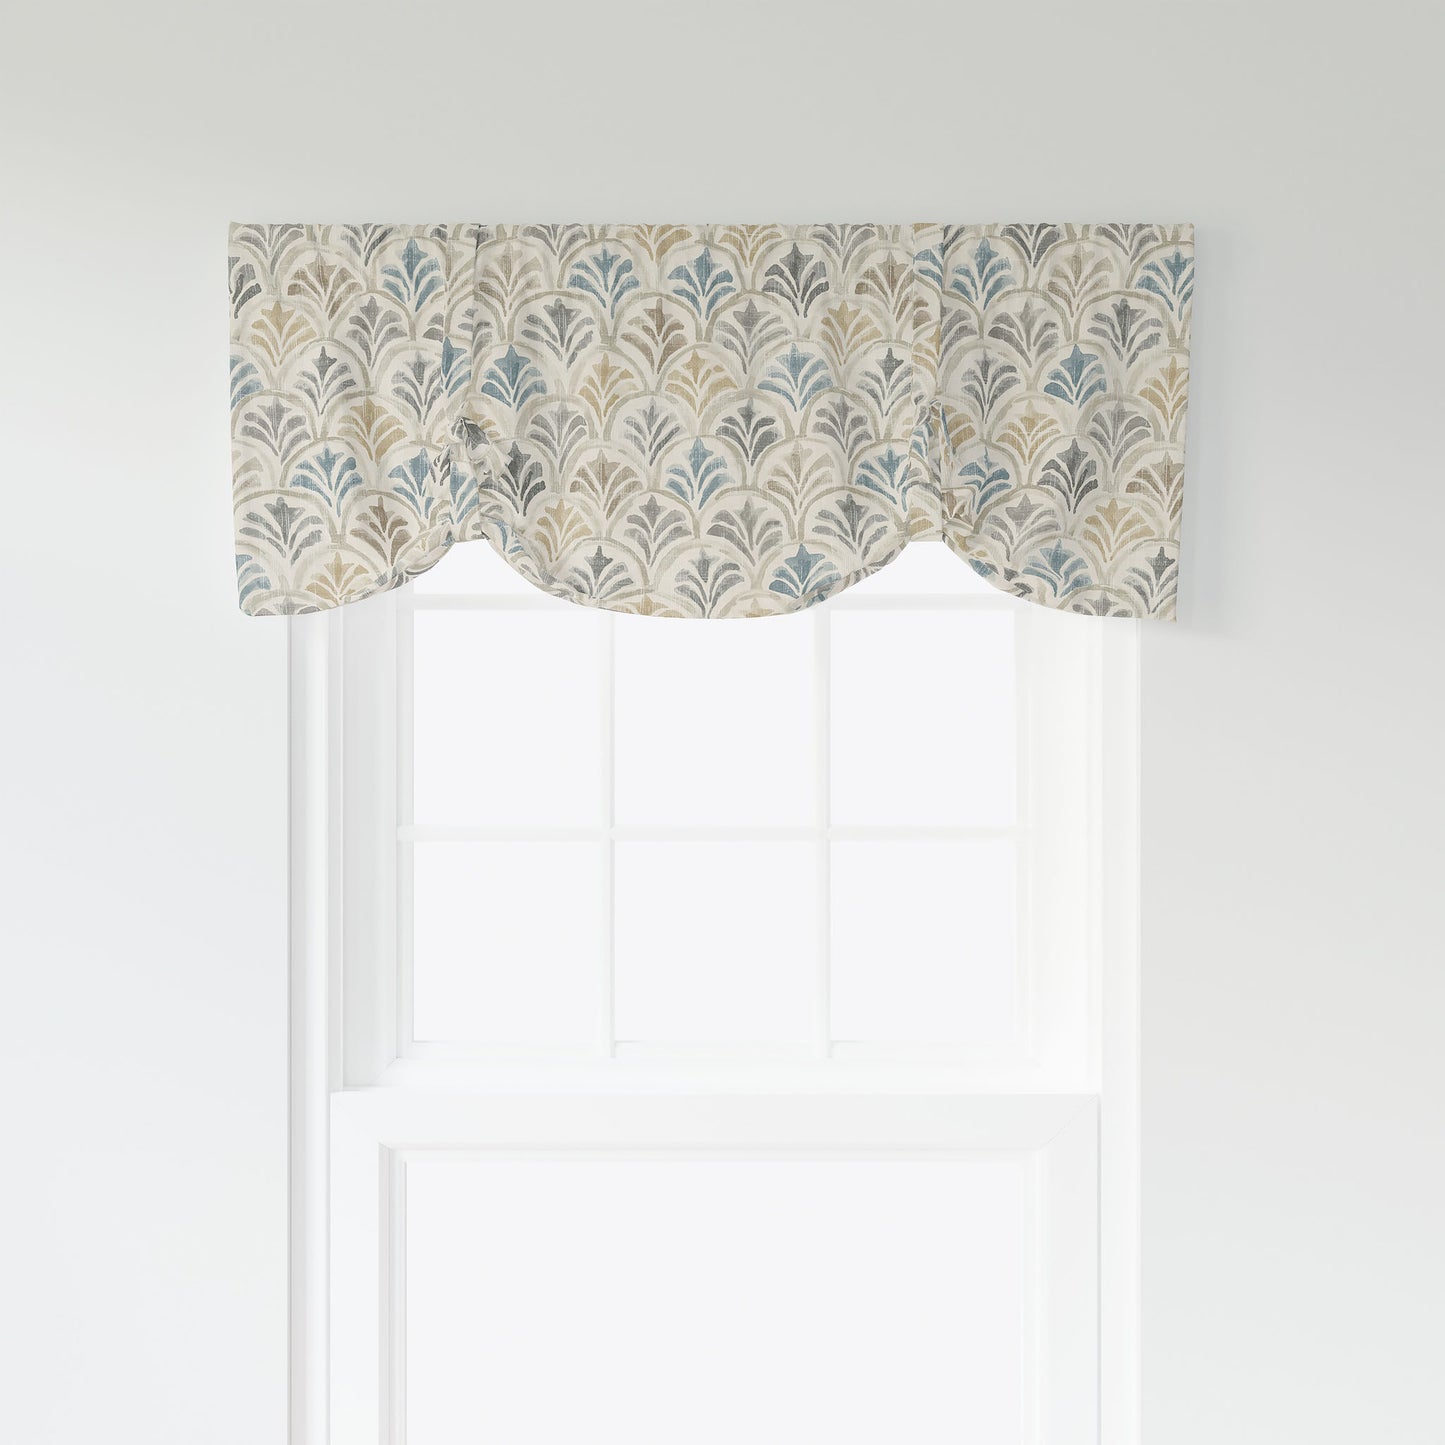 Tie-up Valance in Countess Harbor Blue Scallop Watercolor